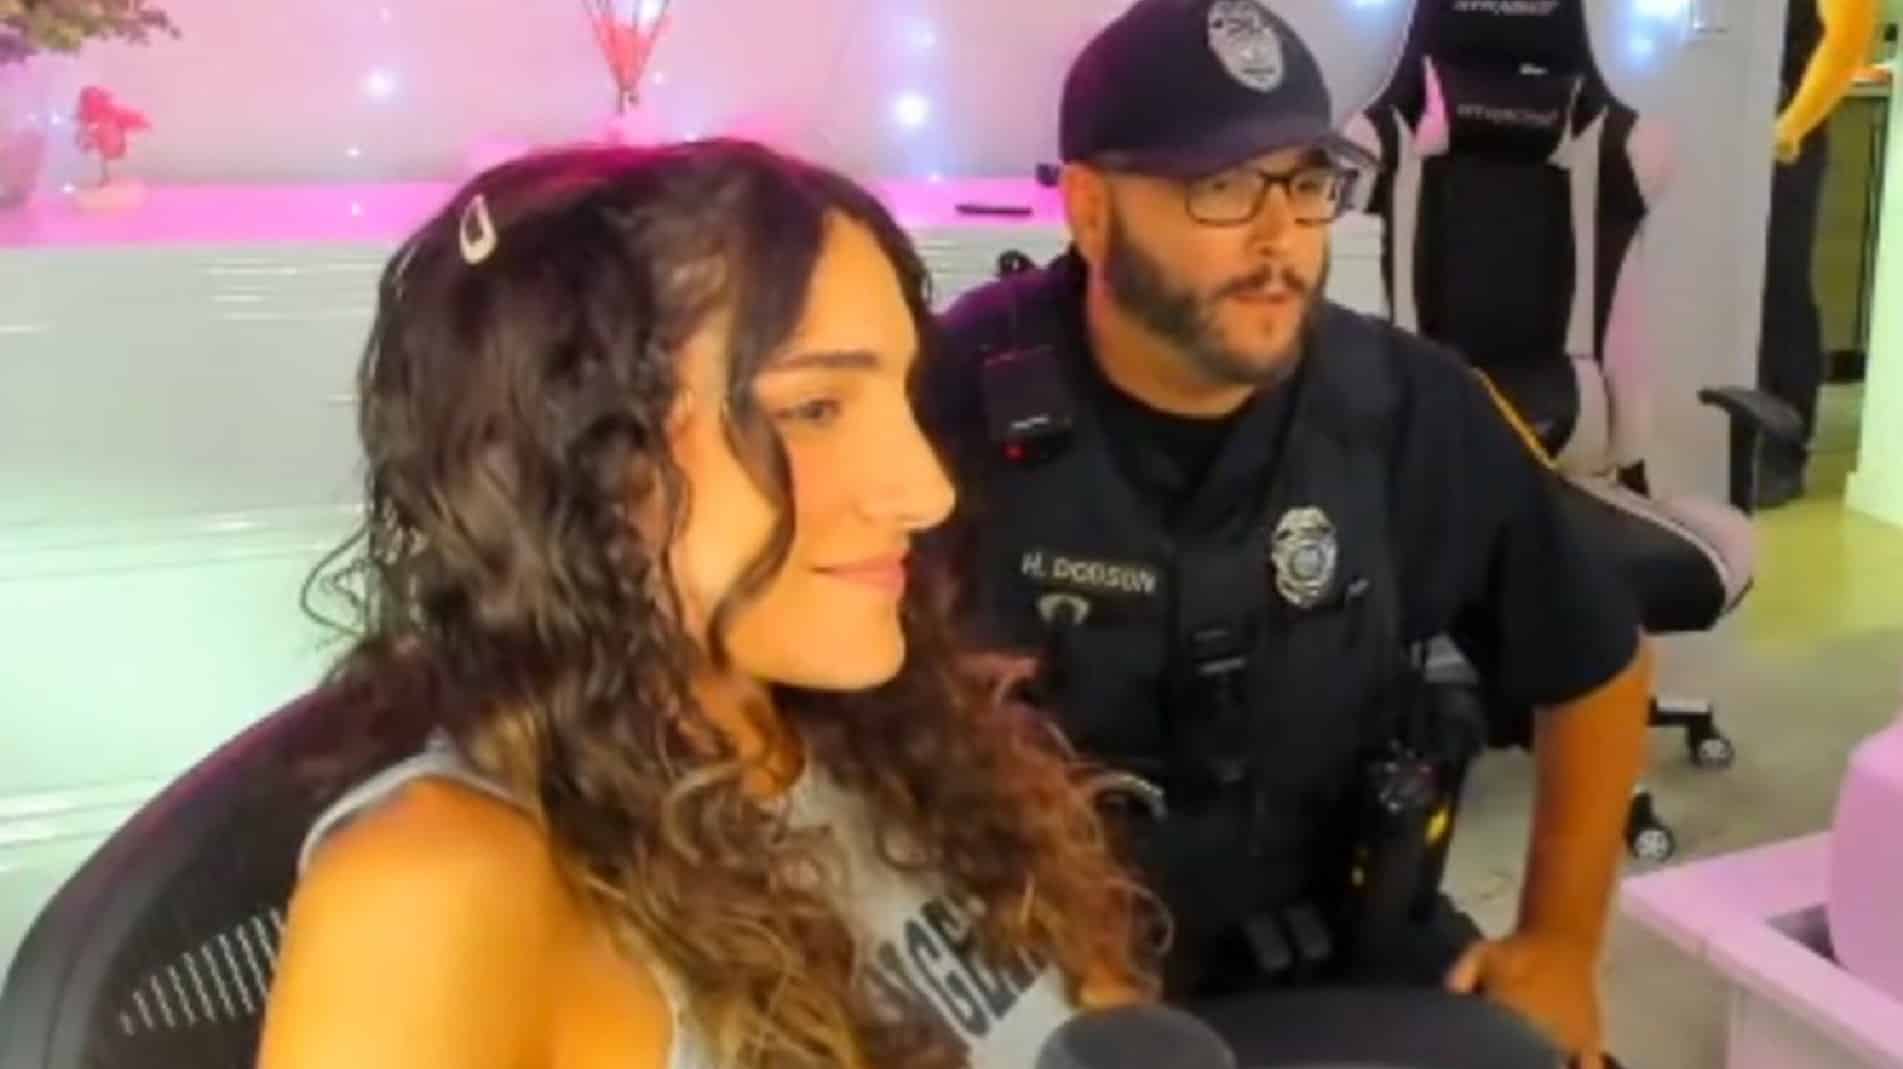 Nadia gets swatted on Twitch